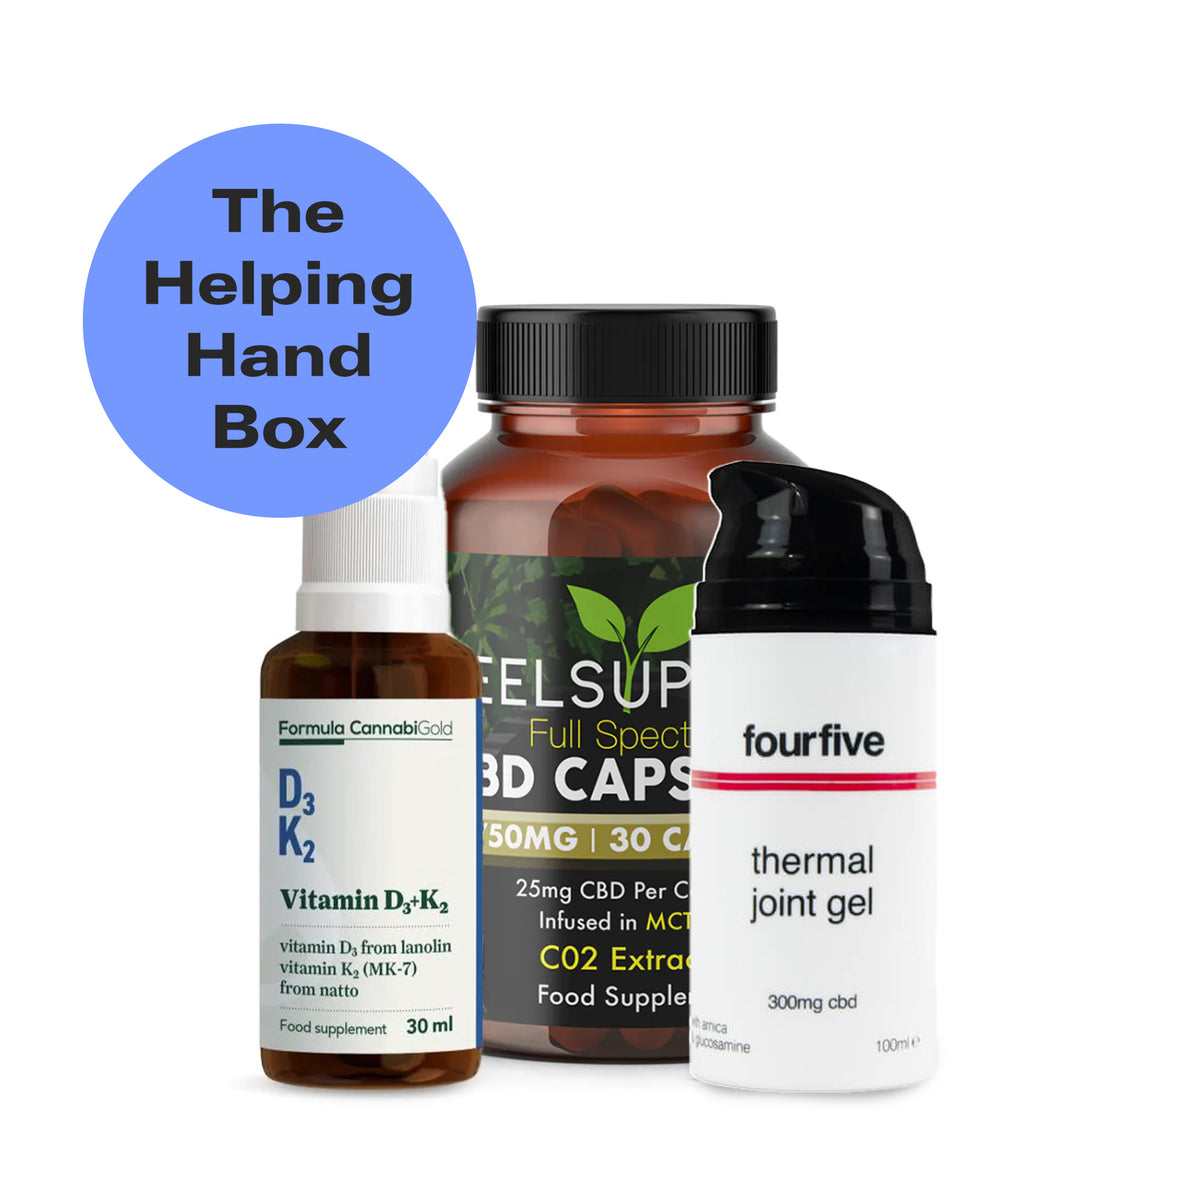 The Helping Hand Box